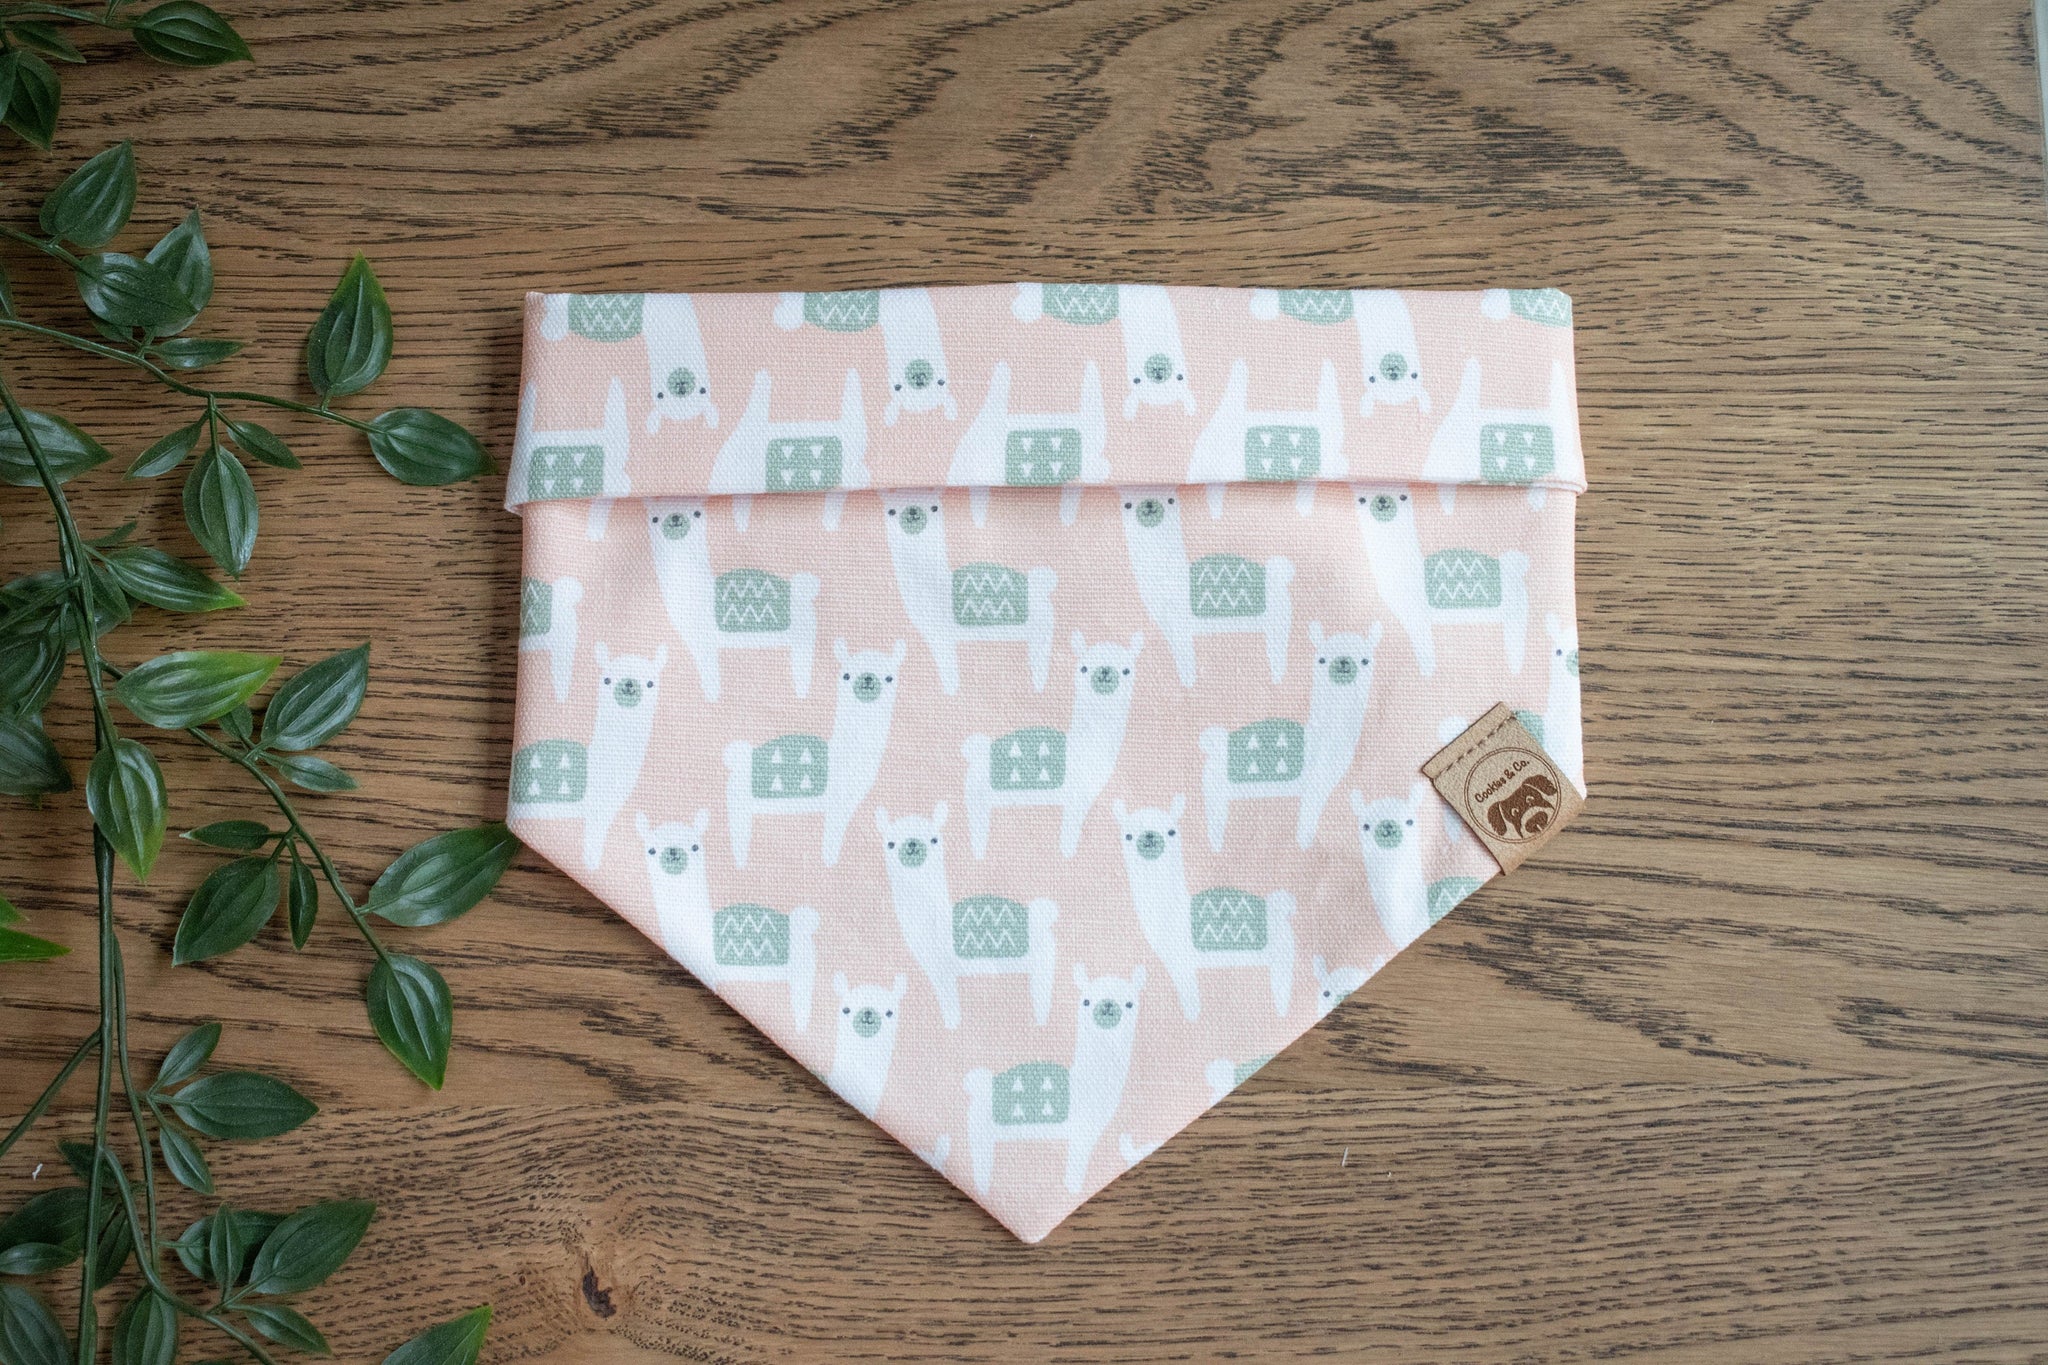 Pack'a Alpacas bandana print, featuring rows of alpacas closely packed, with head turned facing forward